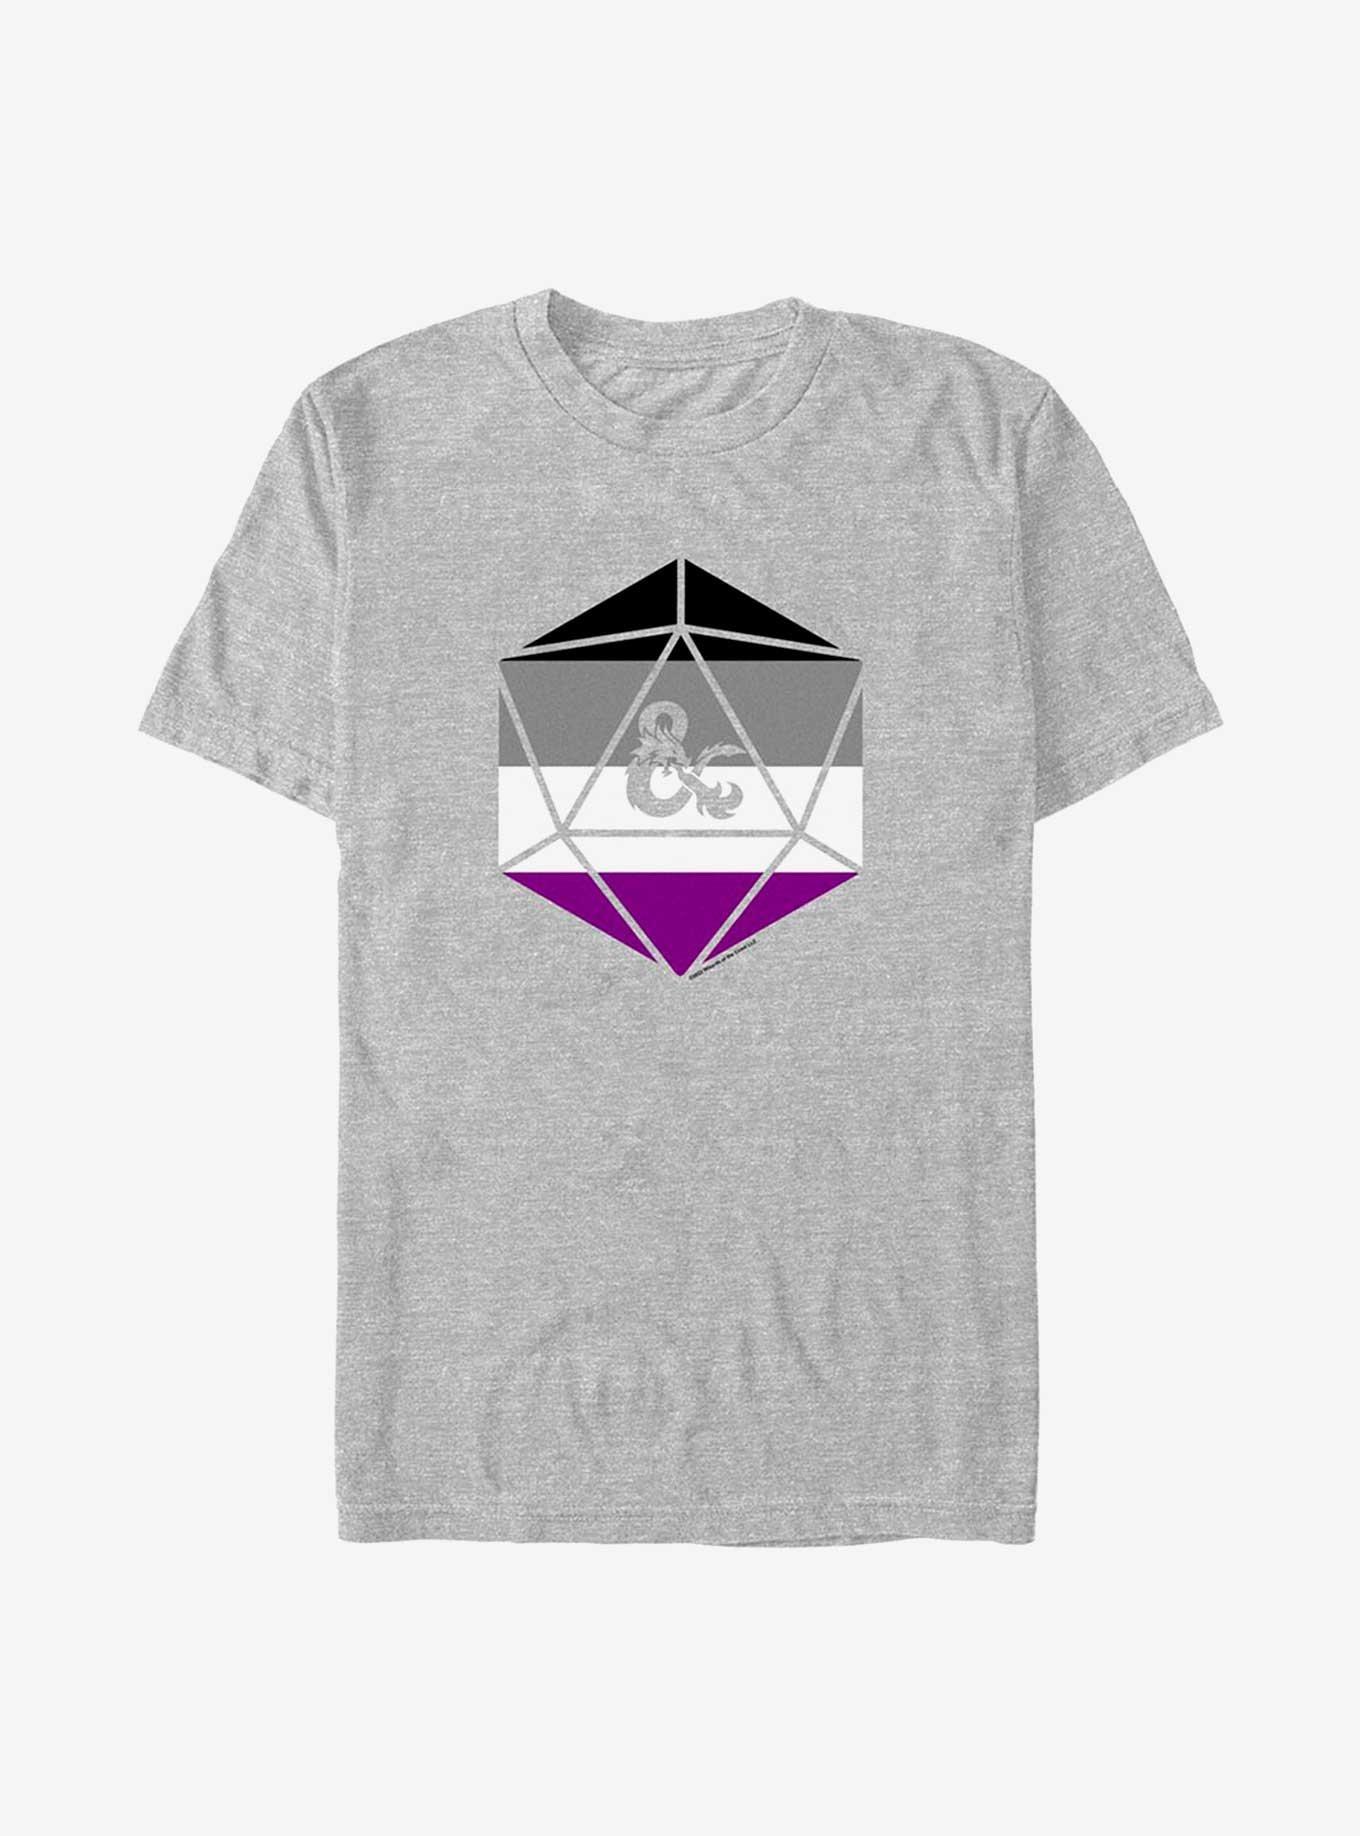 Dungeons & Dragons Asexual Pride Dice T-Shirt